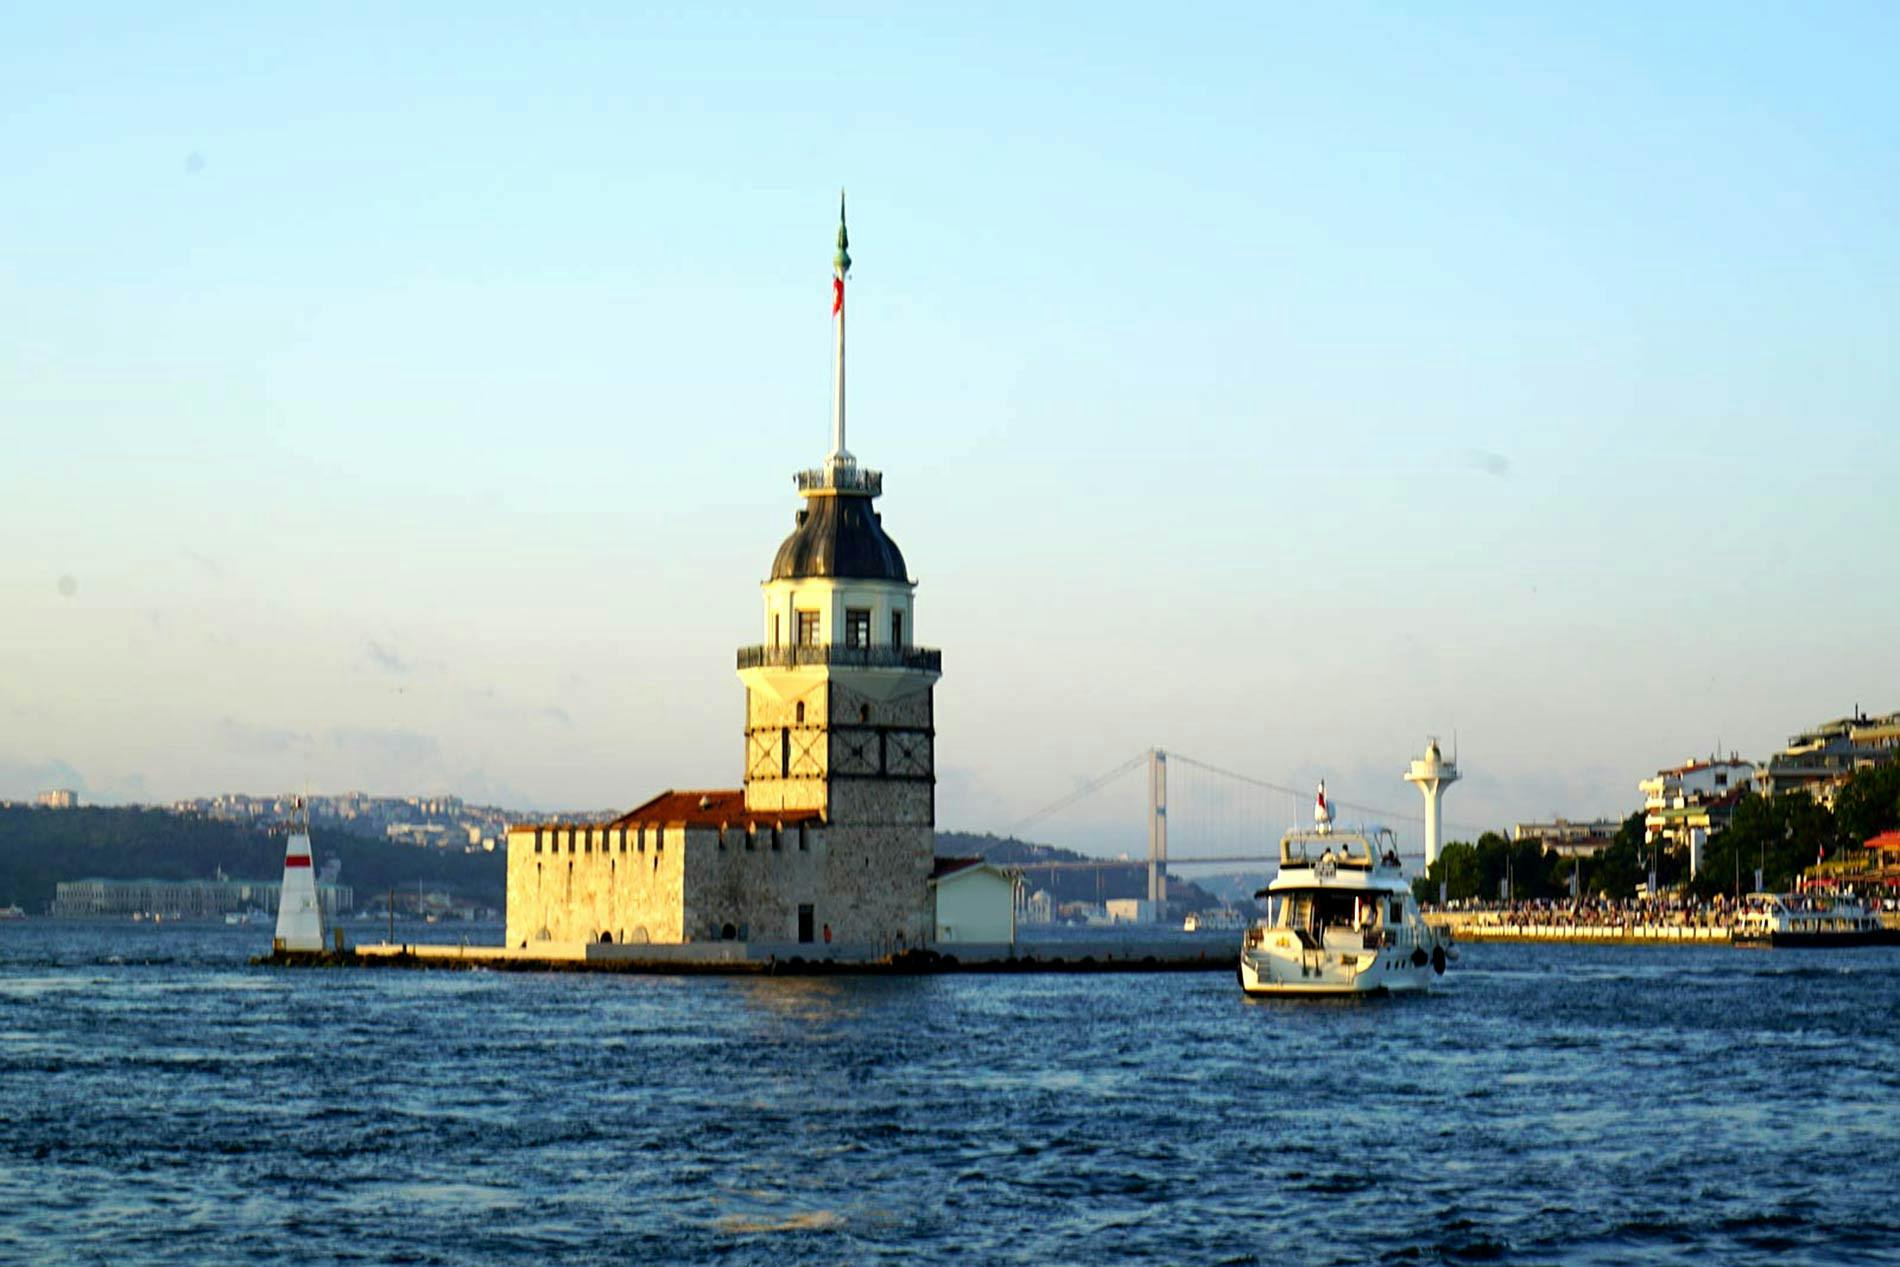 Bus-and-Boat-Istanbul-Bosphorus-view-maiden-Tower.jpg